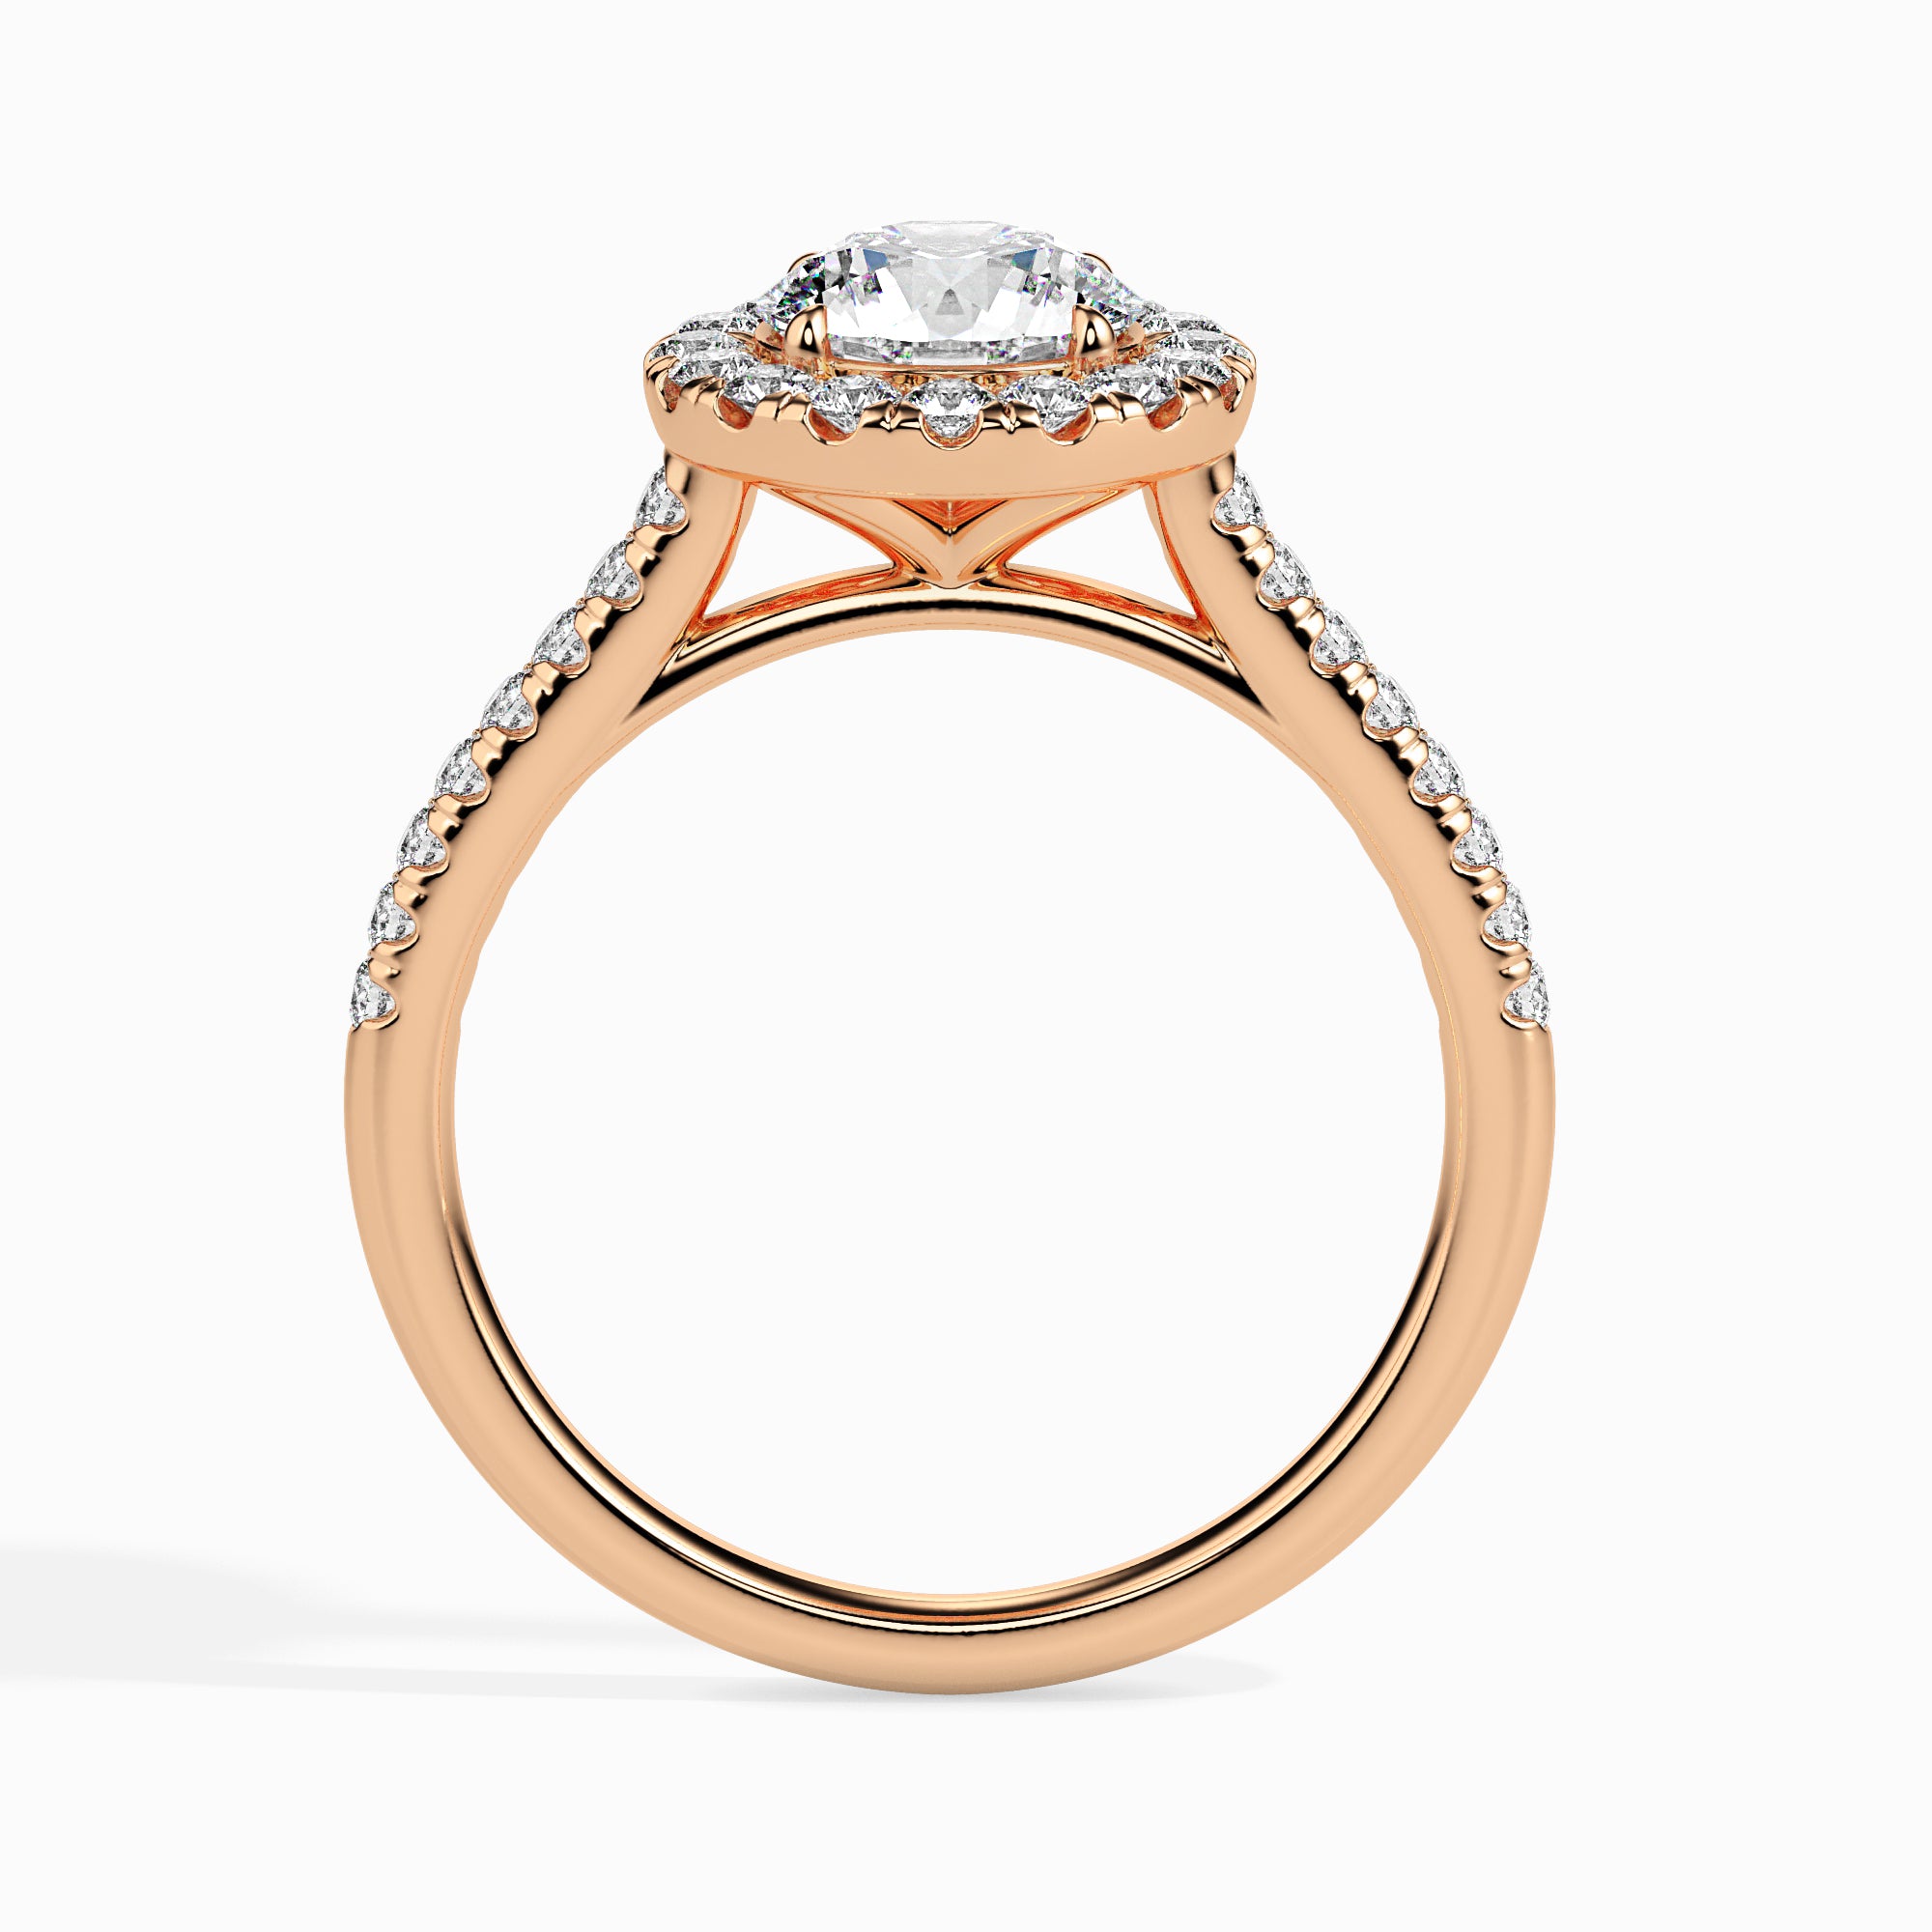 70-Pointer Lab Grown Solitaire Halo Diamond Shank 18K Rose Gold Ring JL AU LG G 19031R-A